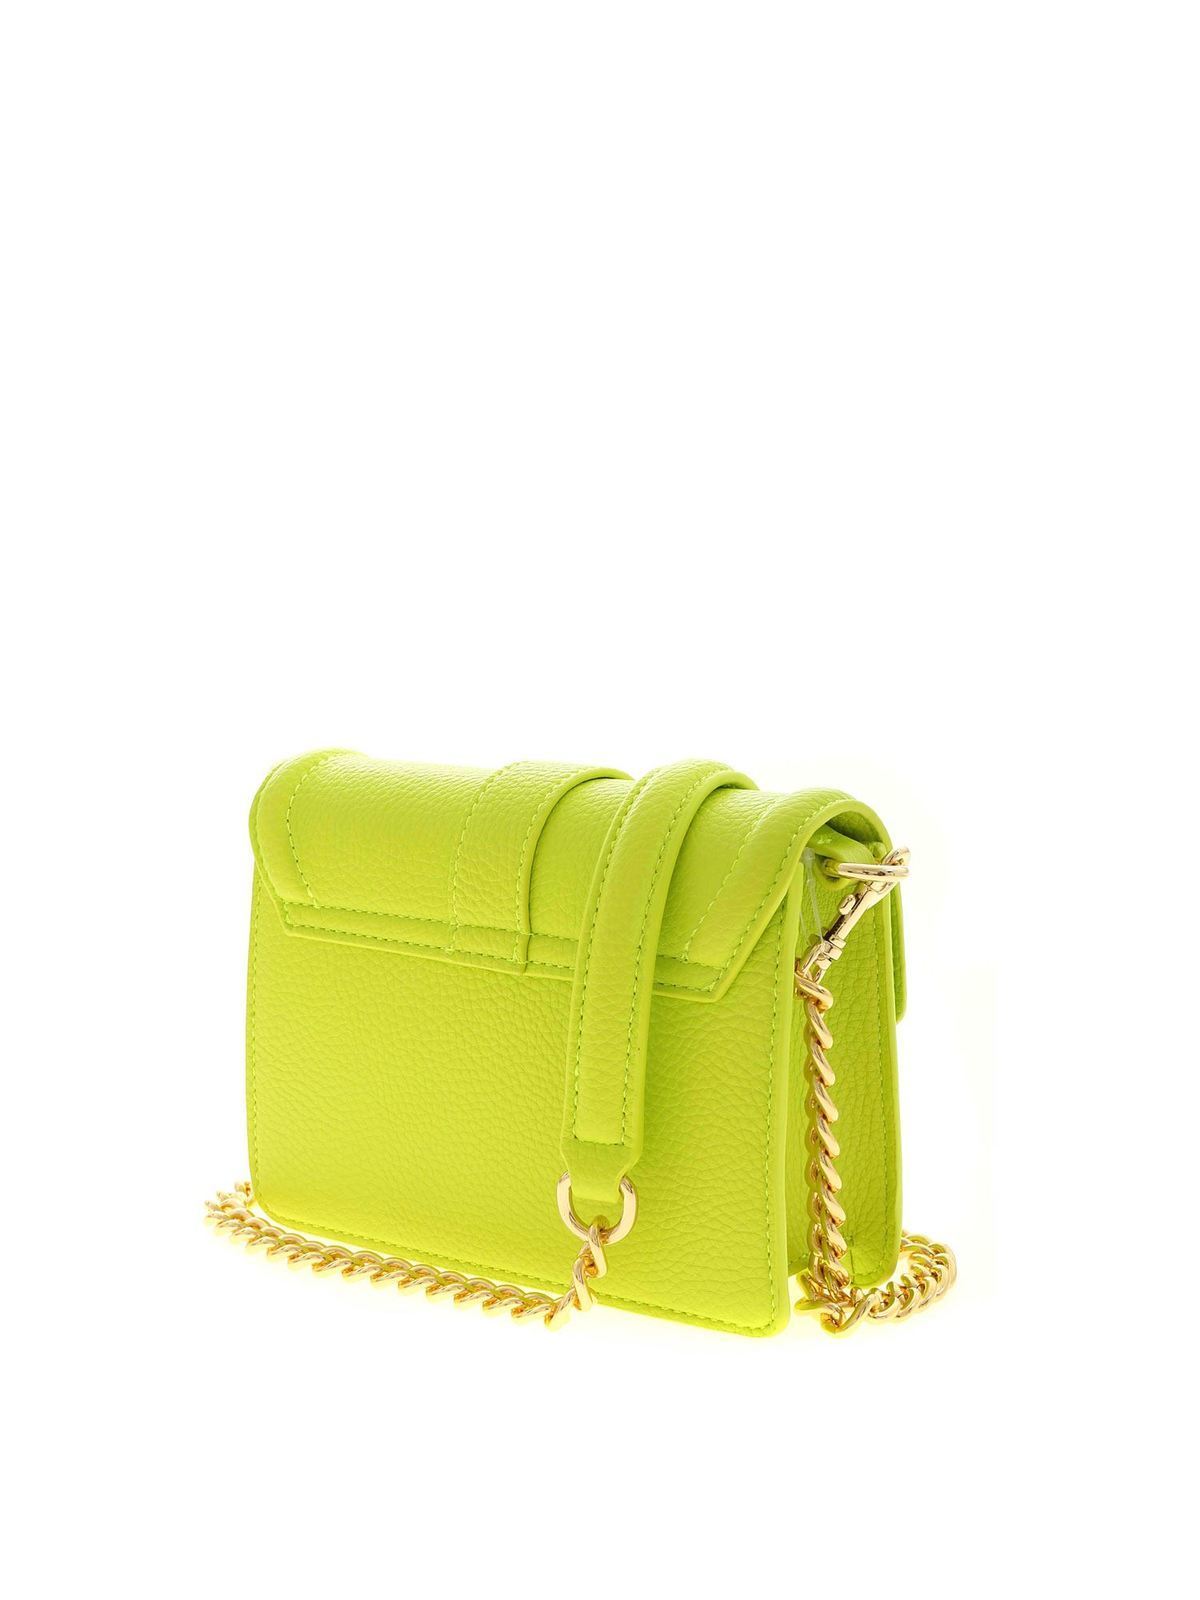 Cross body bags Versace Jeans Couture - Couture bag in lime green -  E1VZABF671578156